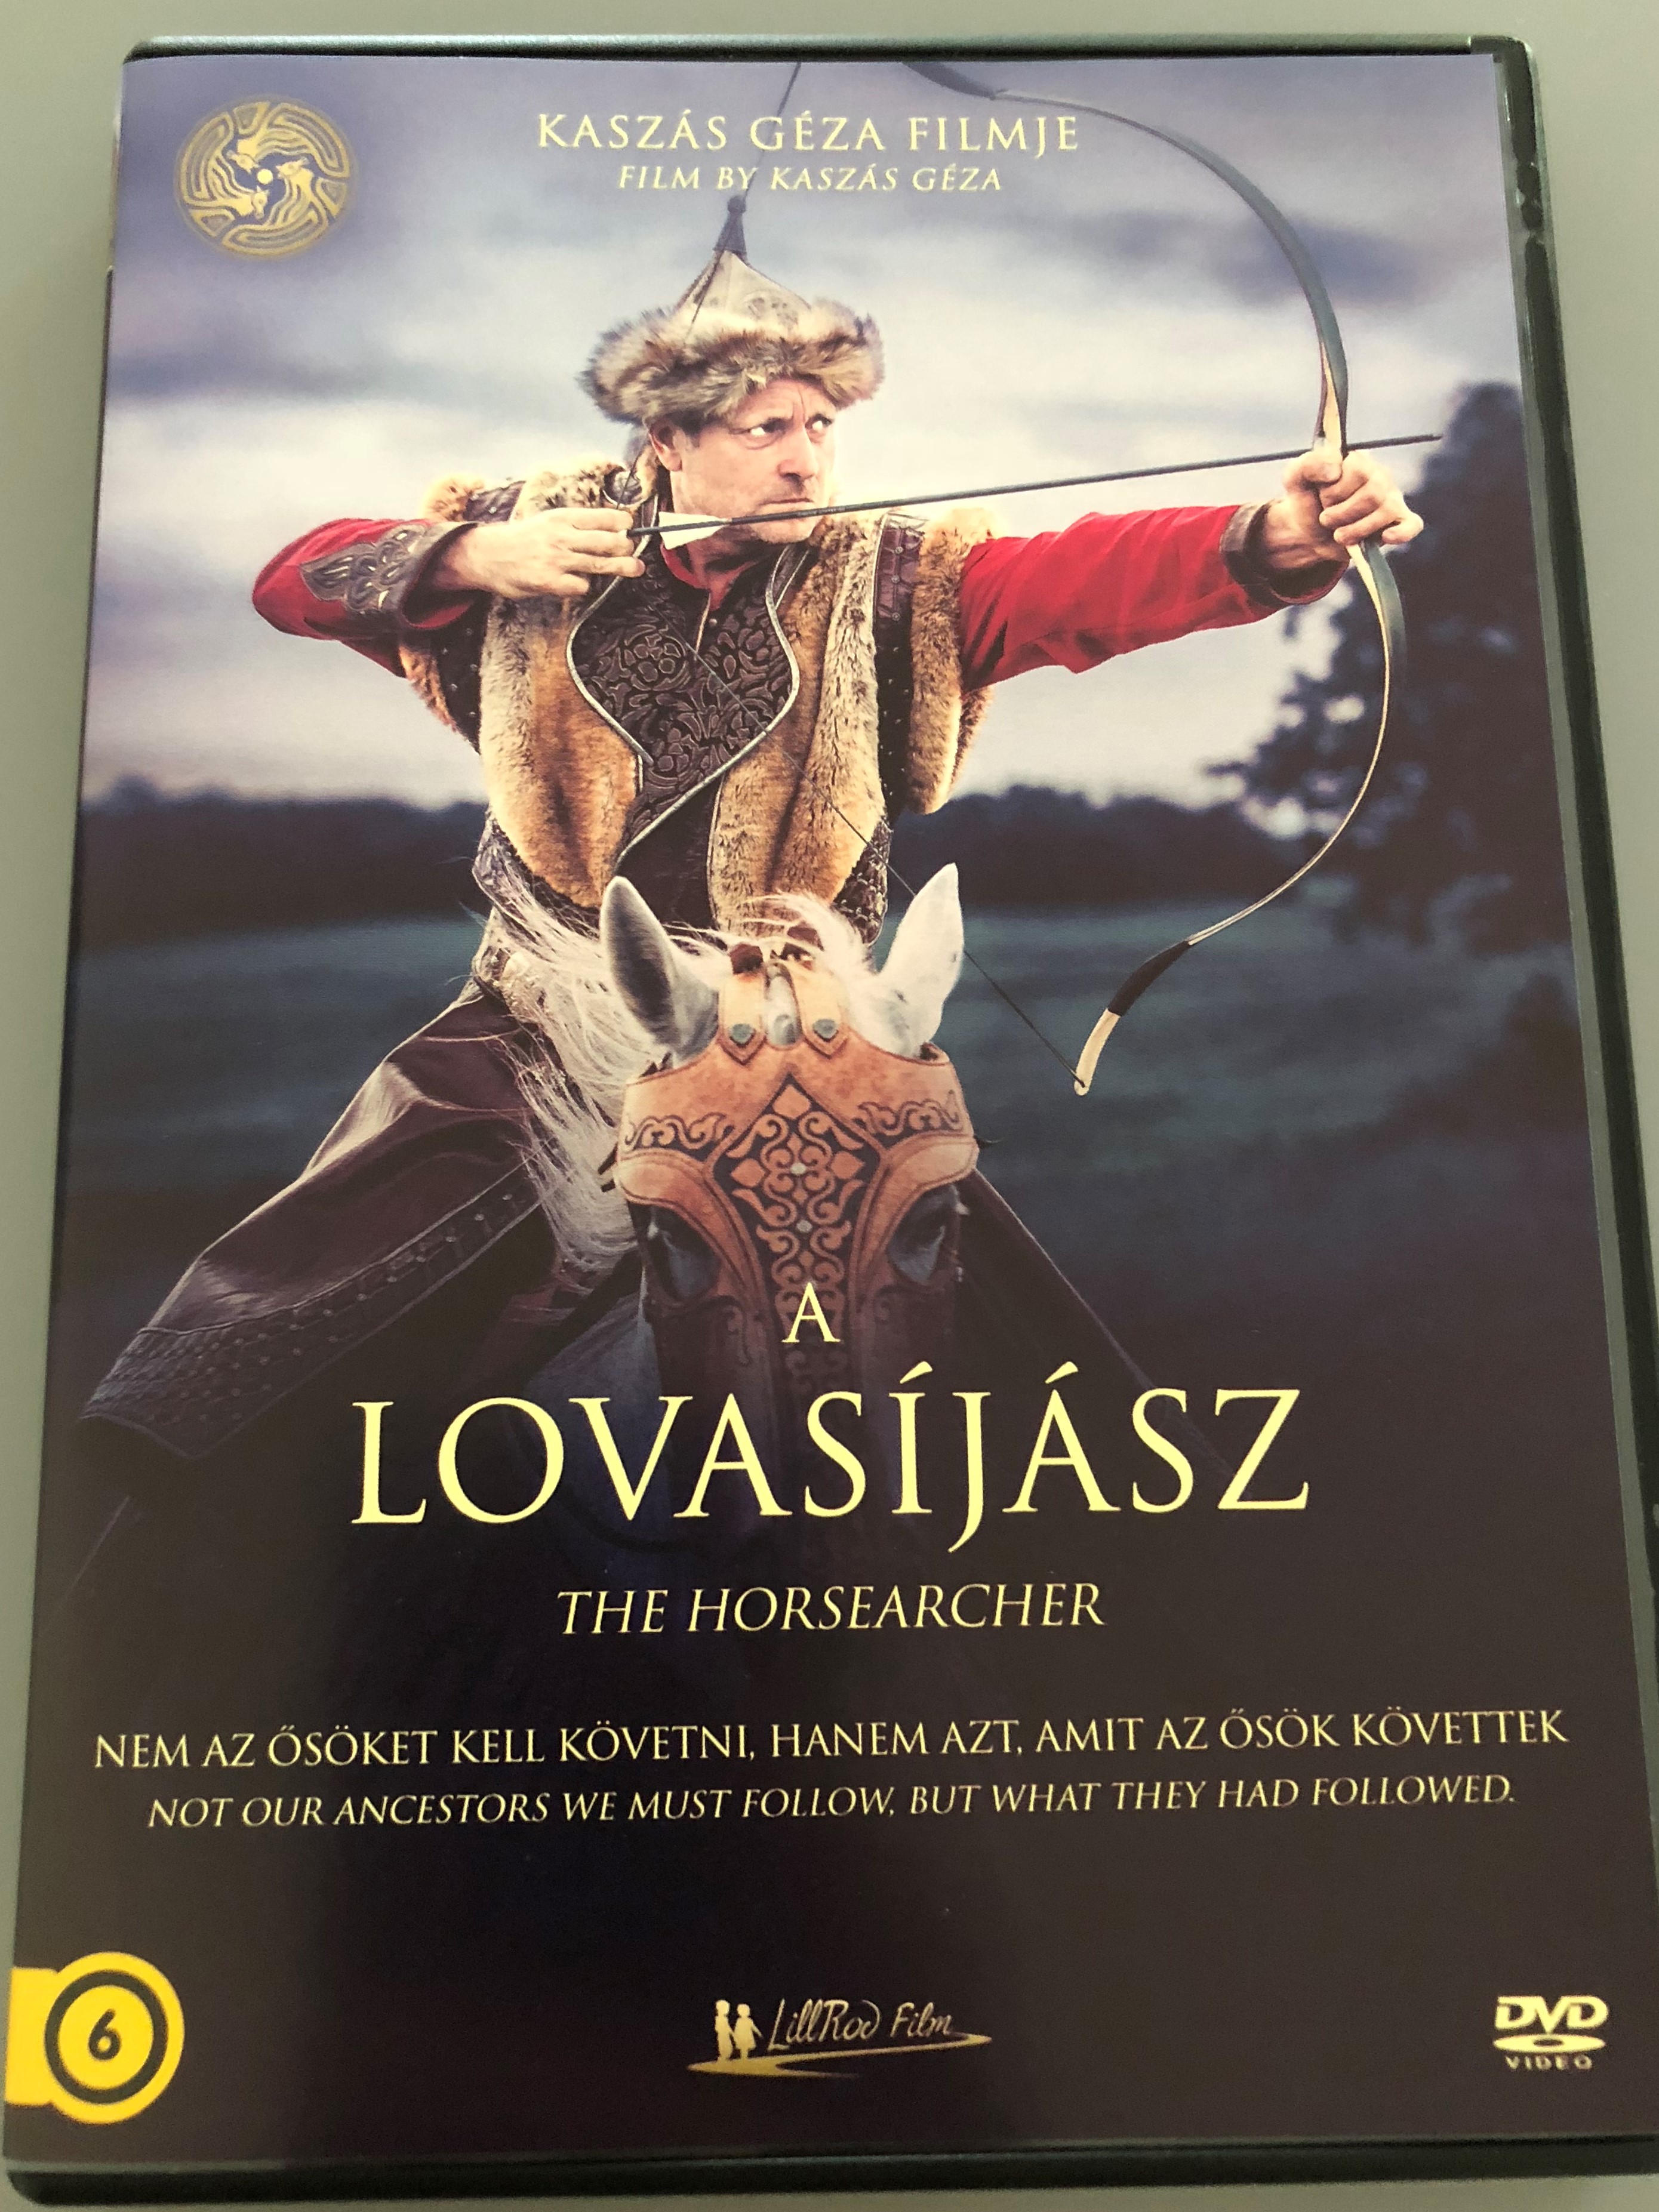 the-horsearcher-dvd-a-lov-s-j-sz-directed-by-kasz-s-g-za-not-our-ancestros-we-must-follow-but-waht-they-had-followed-hungarian-documentary-1-.jpg